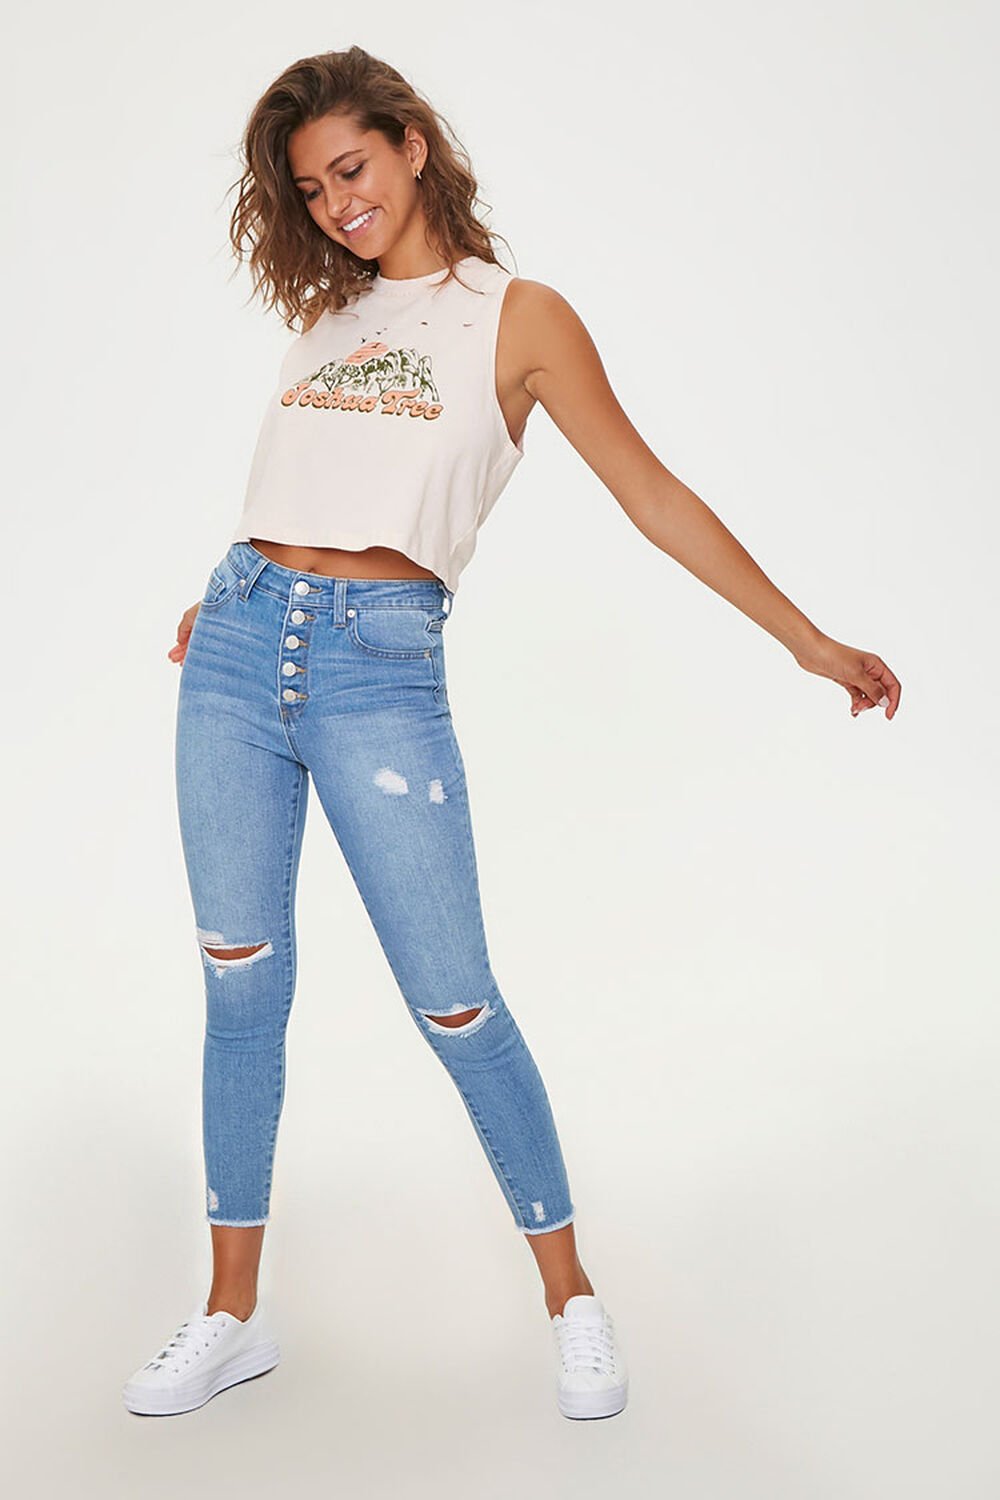 Distressed Skinny Ankle Jeans, image 1